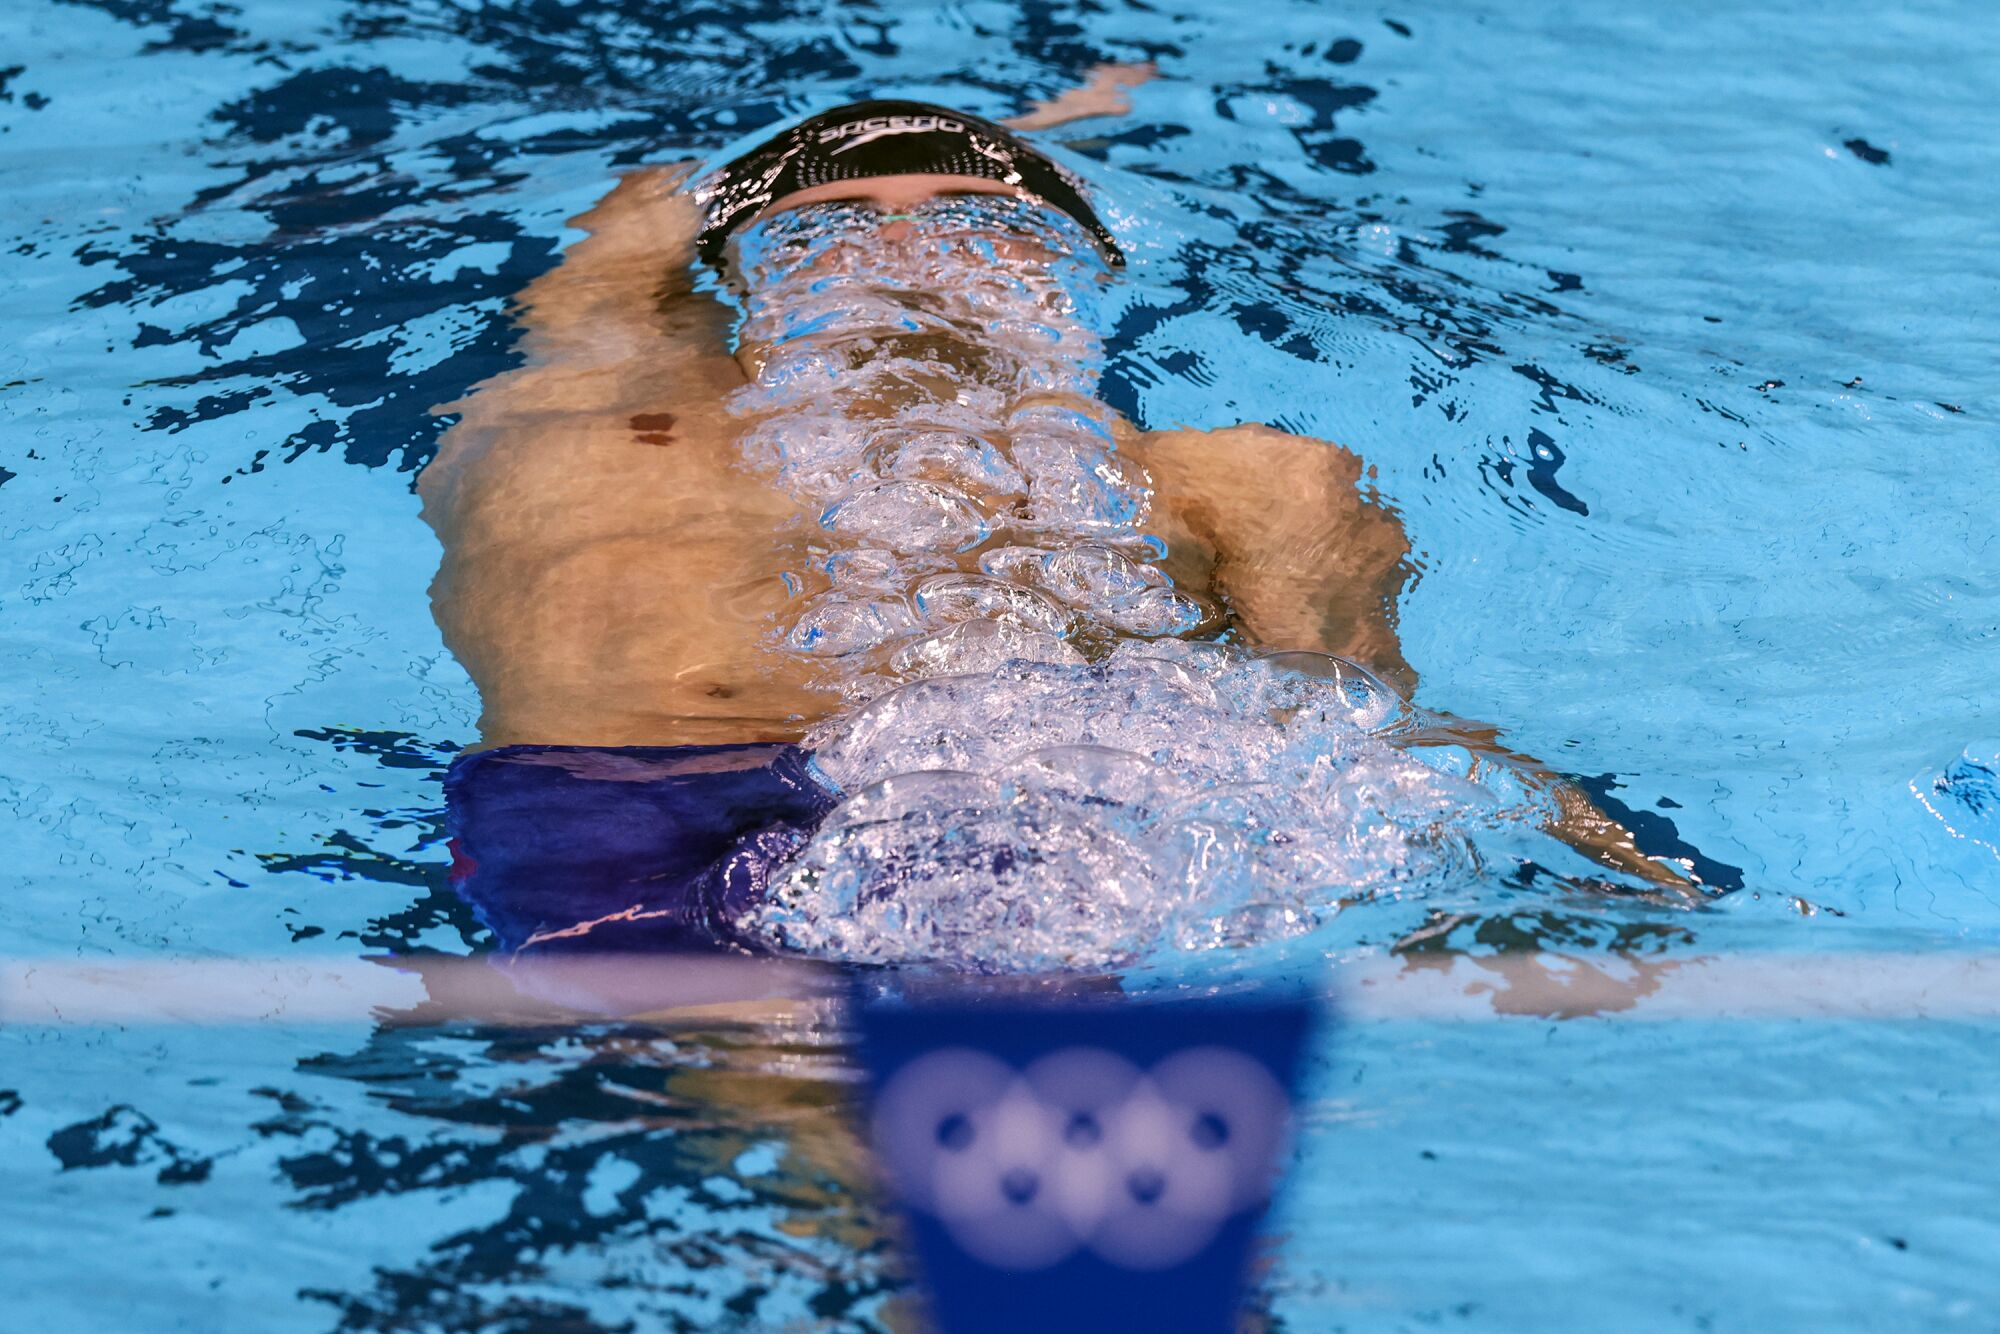 USA's Bryce Mefford competes in the Men's 200m Backstroke Semifinal